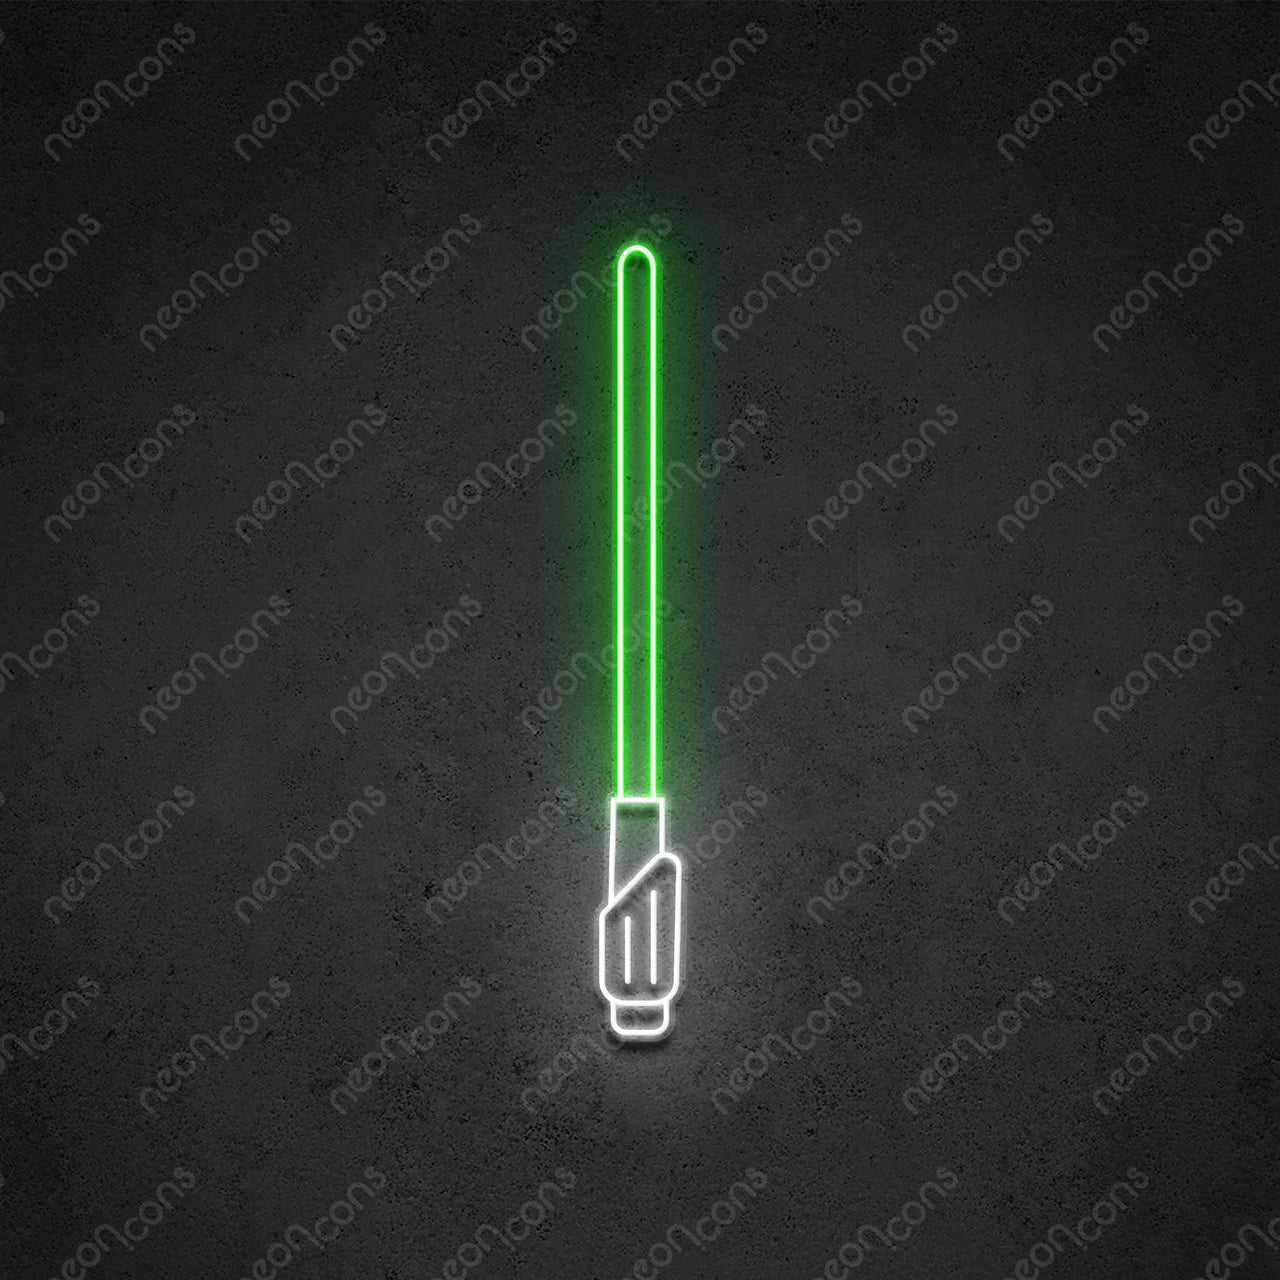 "Space Sword" Neon Sign 60cm (2ft) / Green / LED Neon by Neon Icons